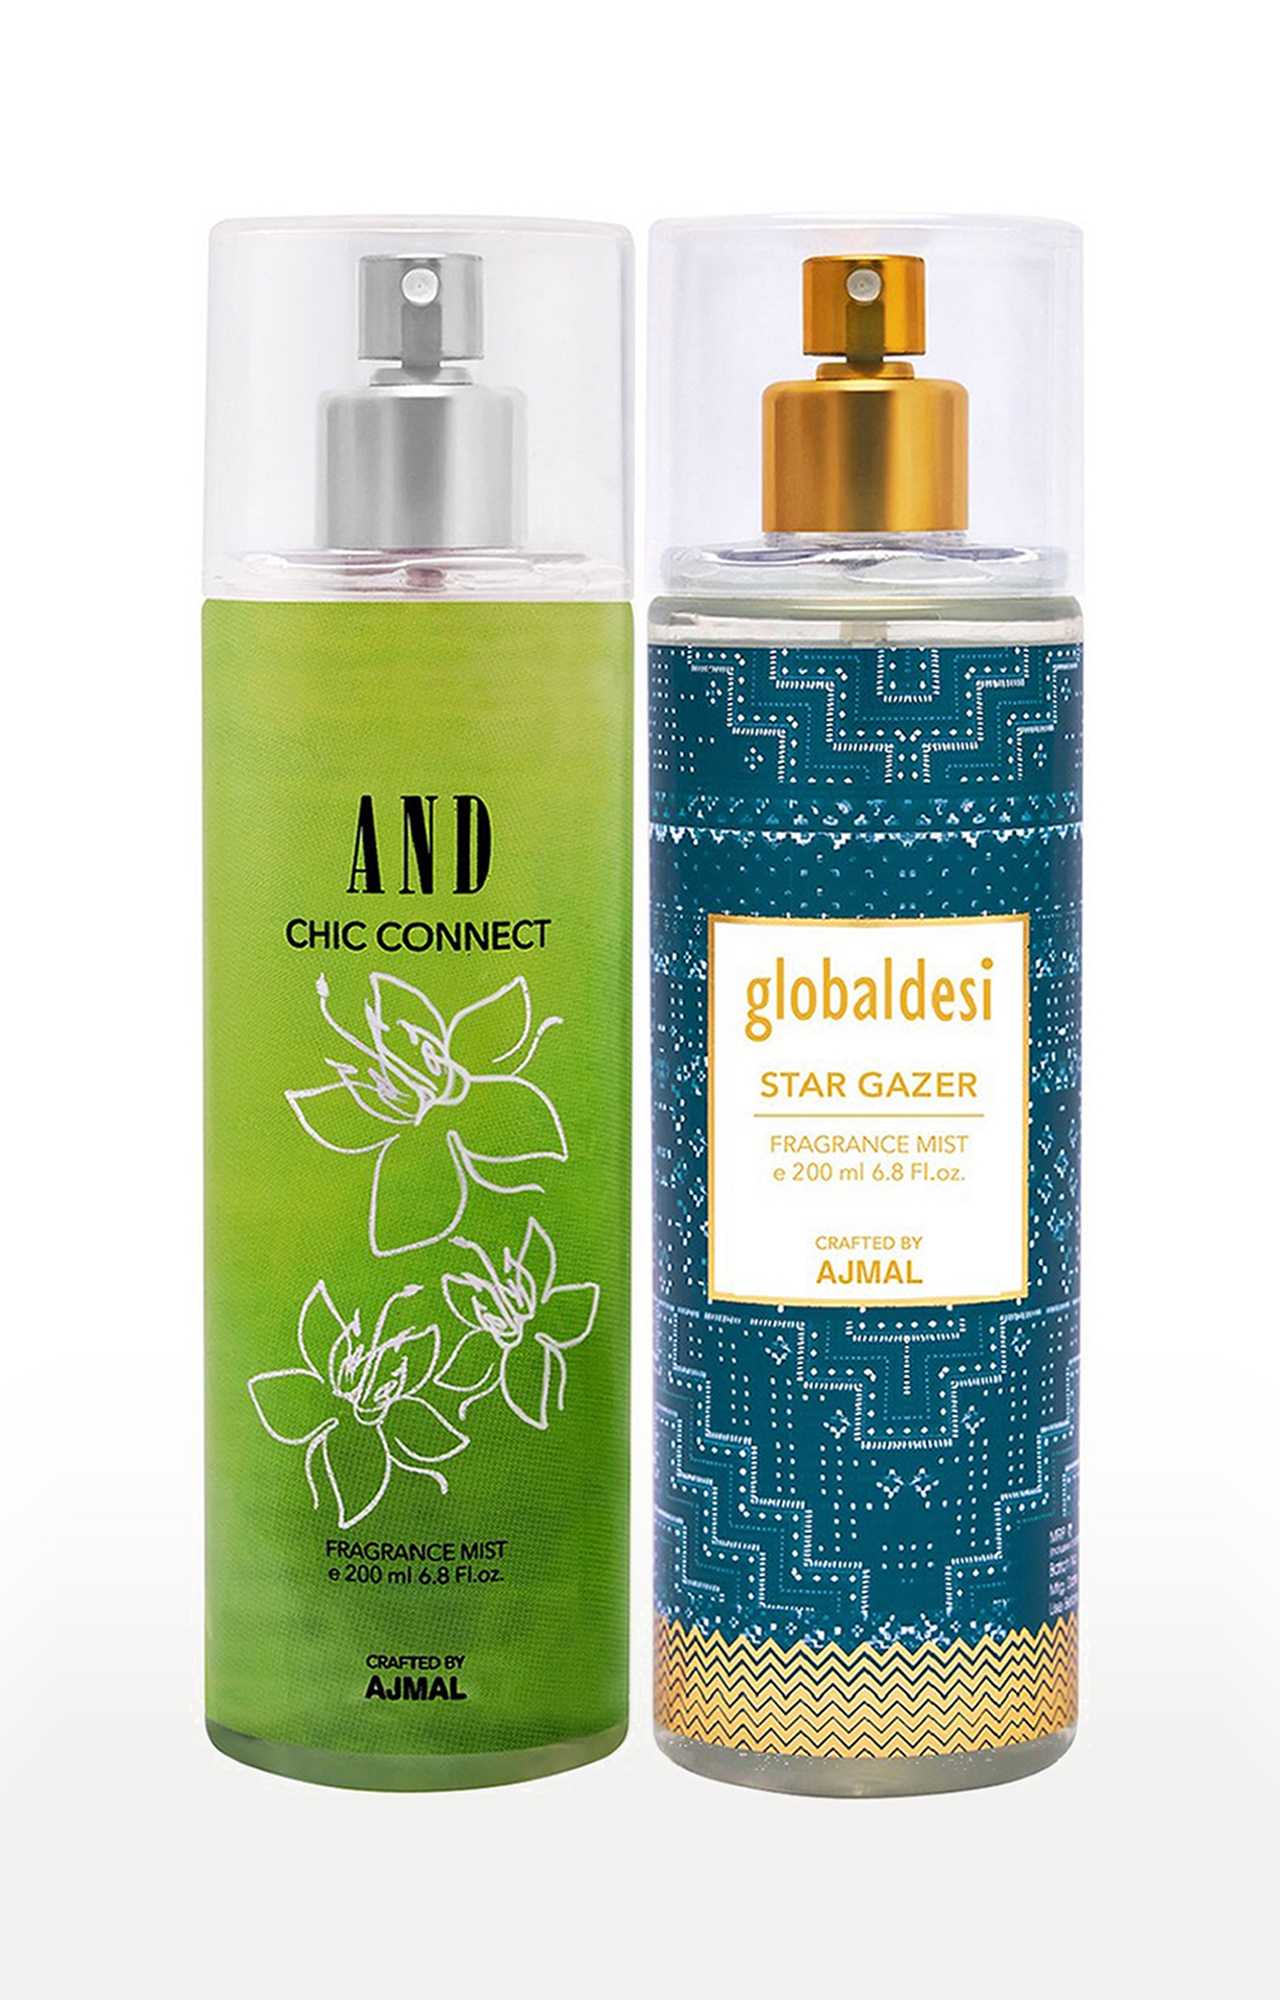 AND Crafted By Ajmal | AND Chi Connect Body Mist 200ML & Global Desi Star Gazer Body Mist 200ML Long Lasting Scent Spray Gift For Women Perfume FREE